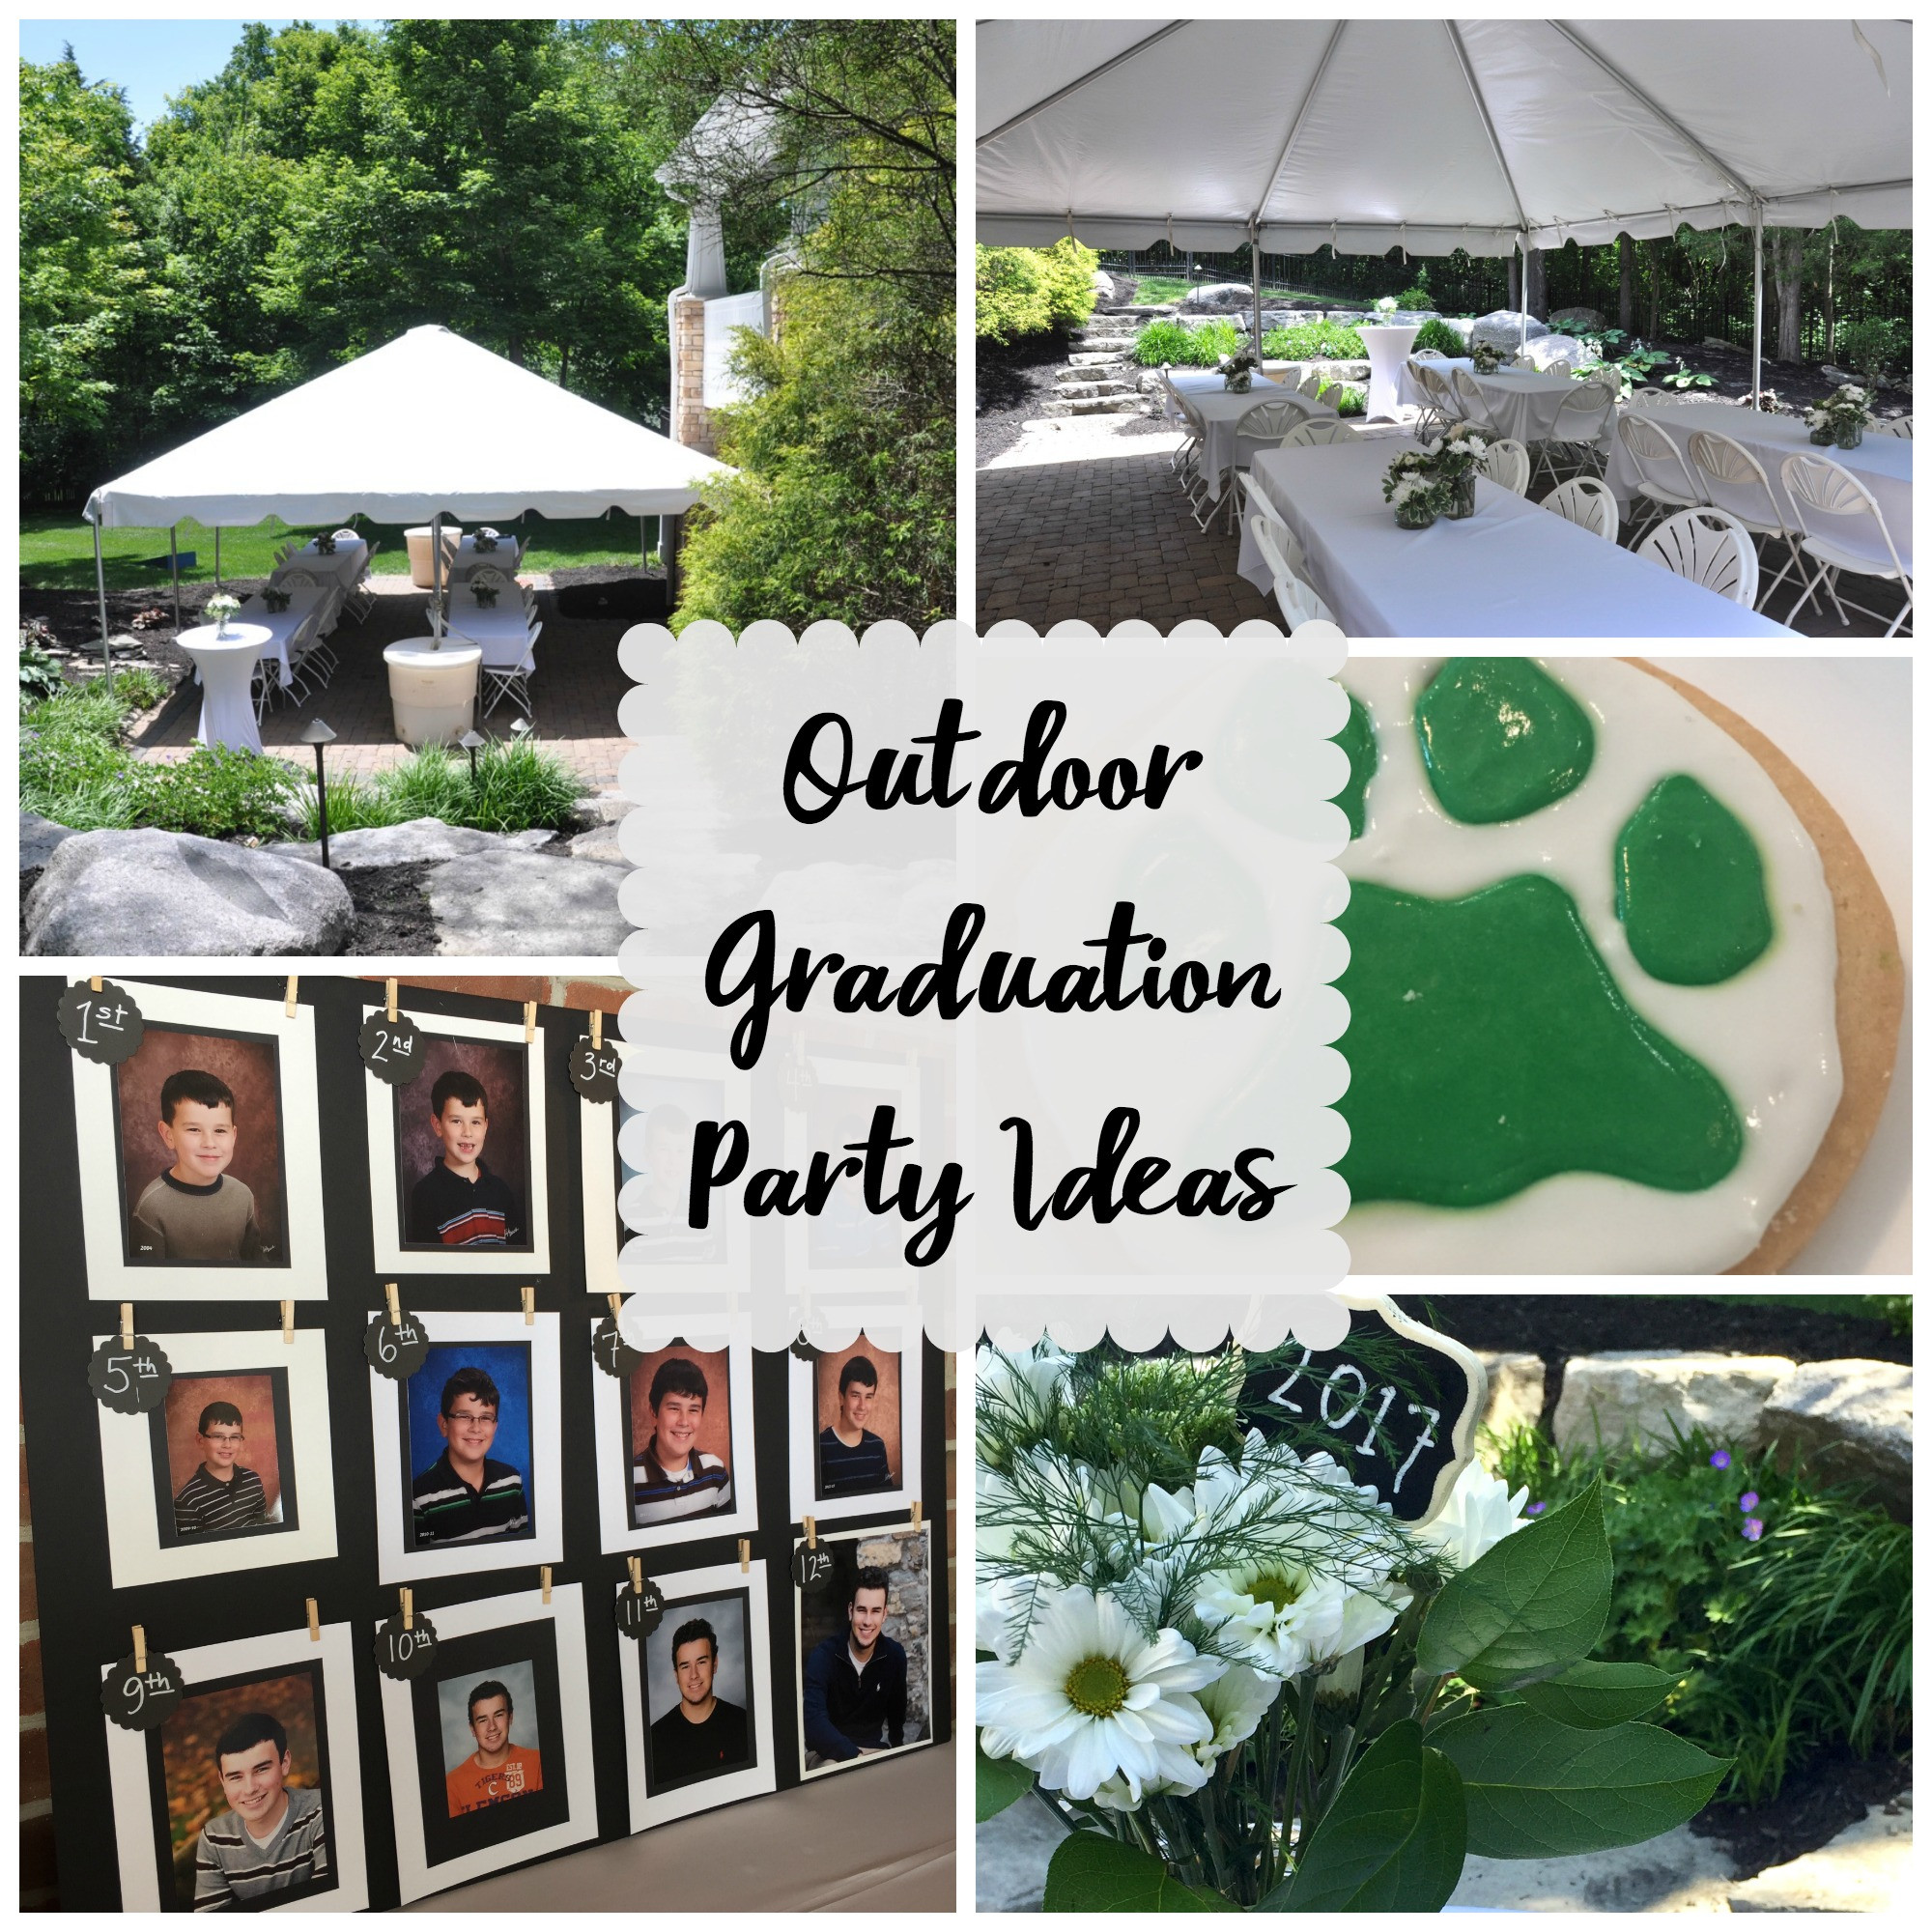 Graduation Party Ideas At A Beach'
 Outdoor Graduation Party Evolution of Style